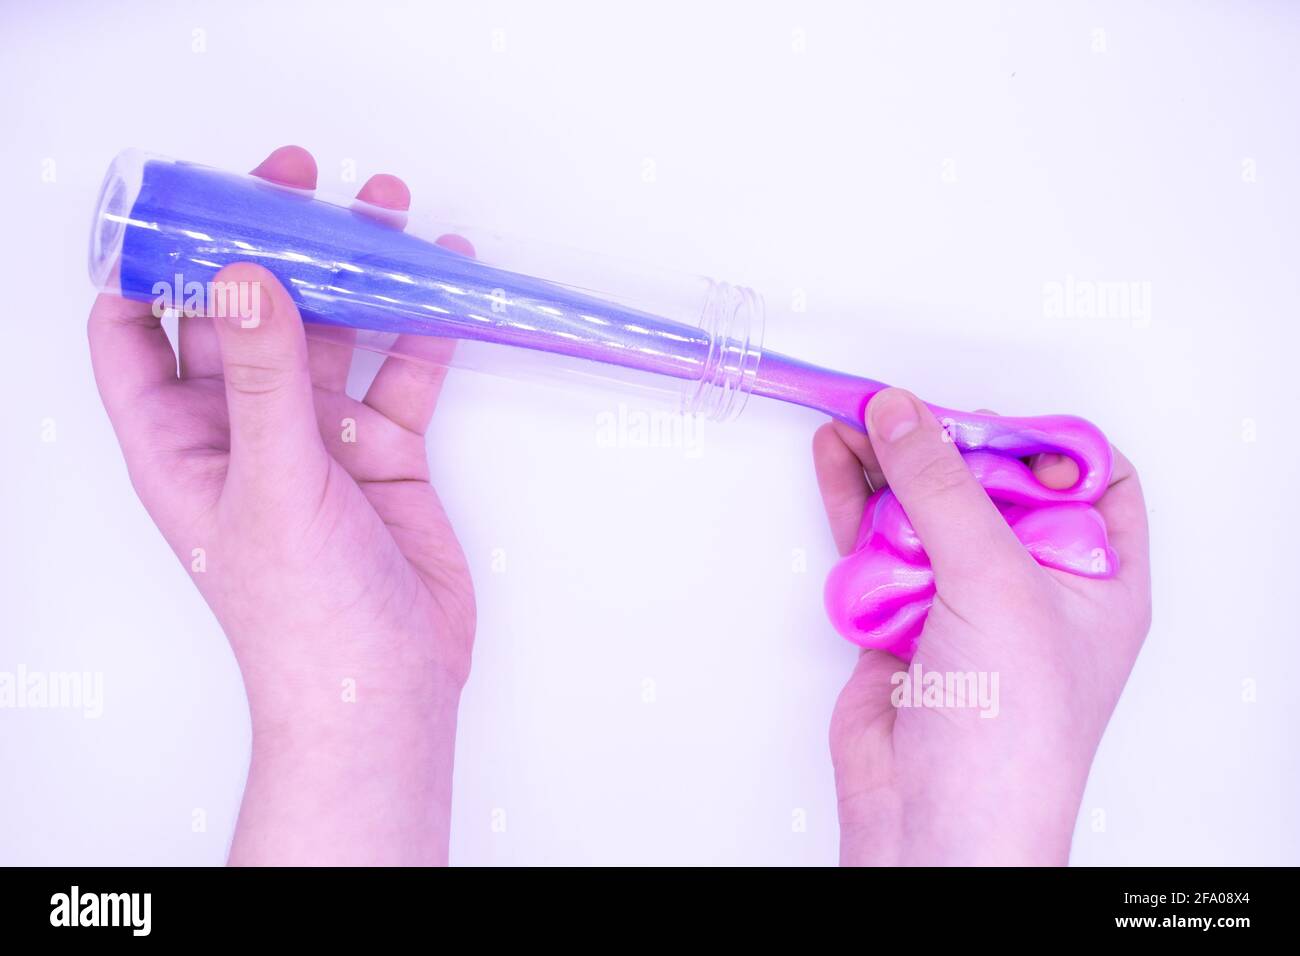 Hands pull out of transparent tube two-tone pink-and-blue slime. Stock Photo